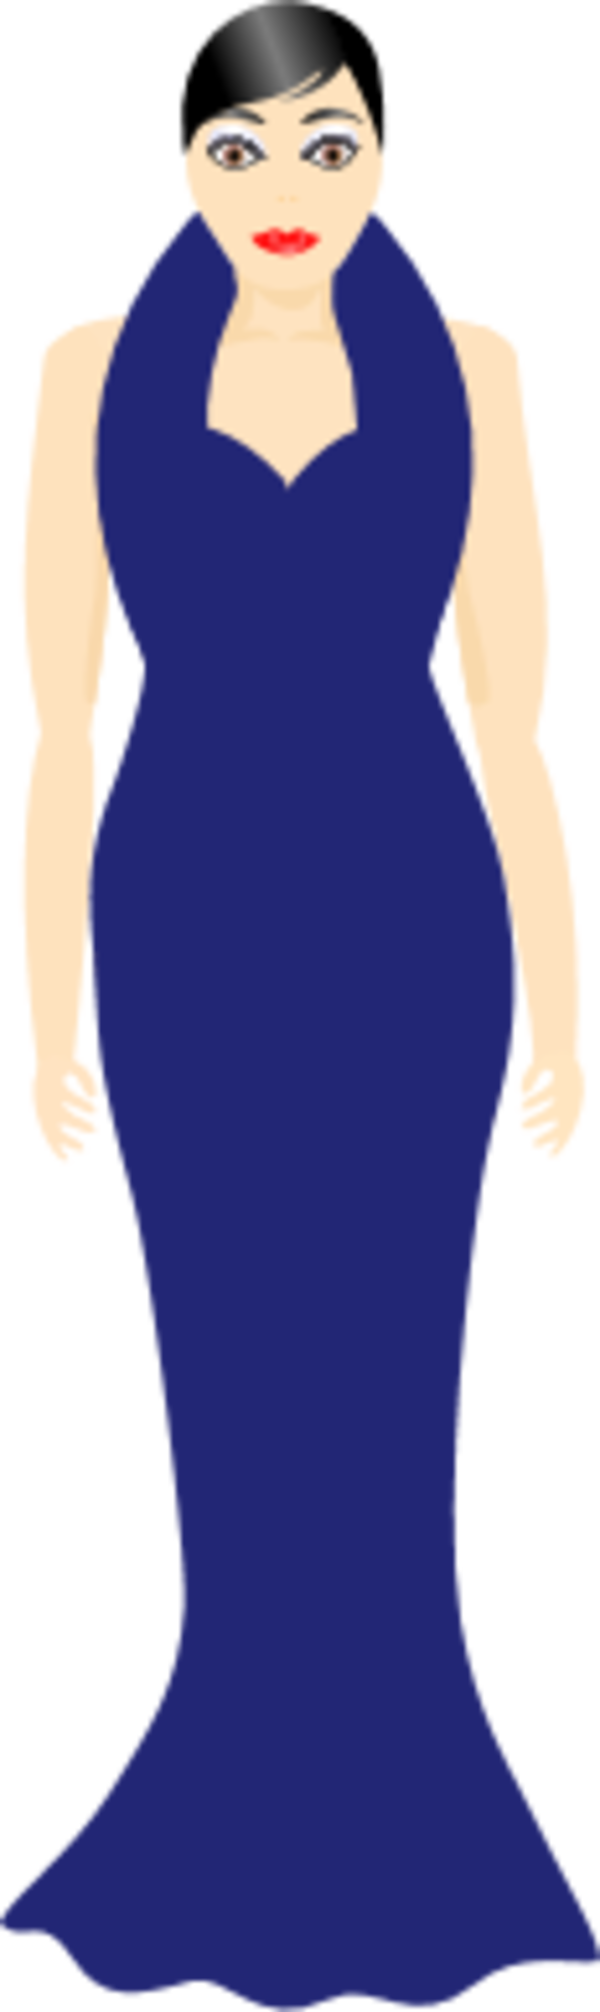 Clipart woman dressing 